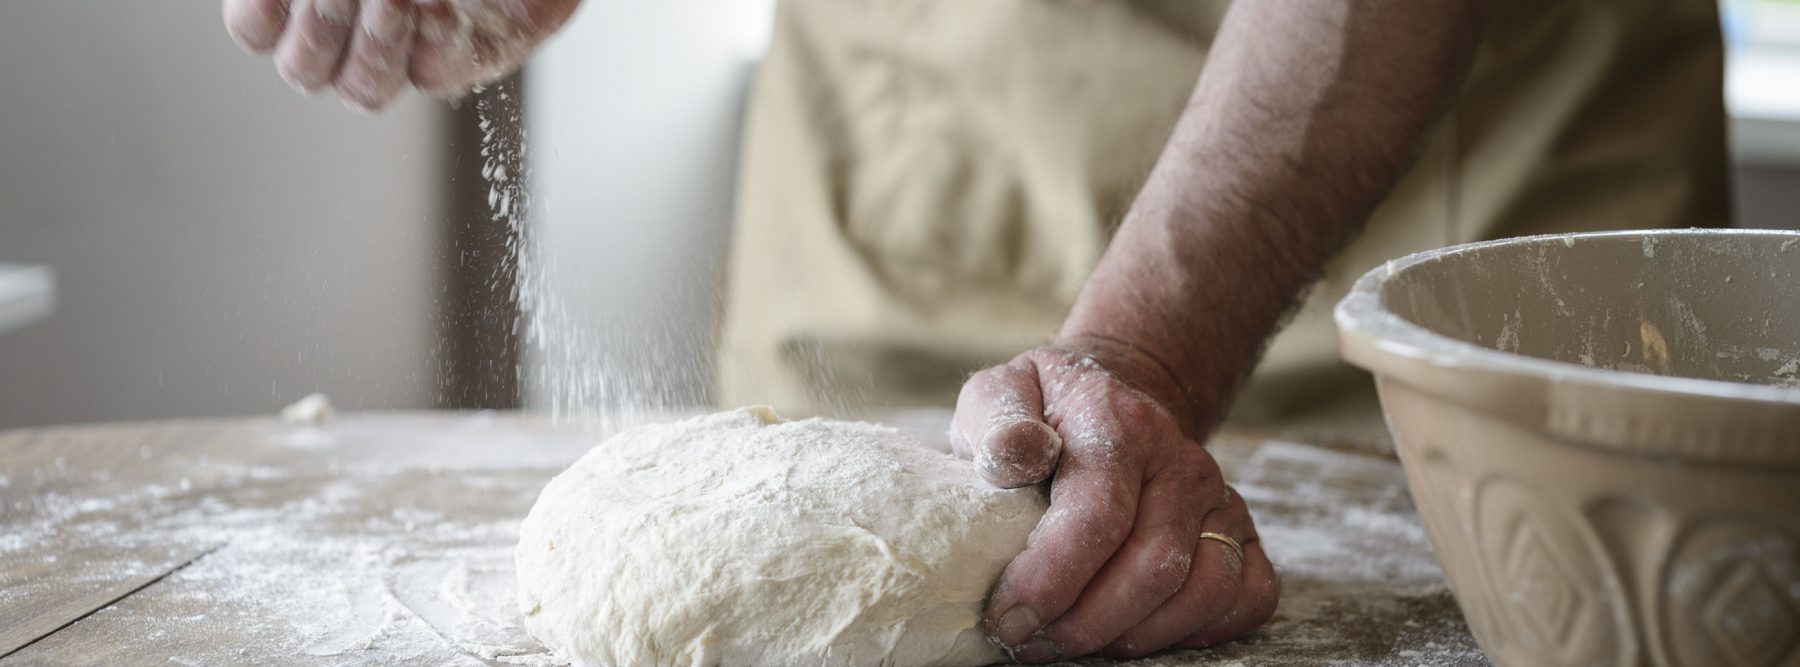 Hand made bread is only one of the locally produced foods that you can enjoy on your trip to Isle of Skye.